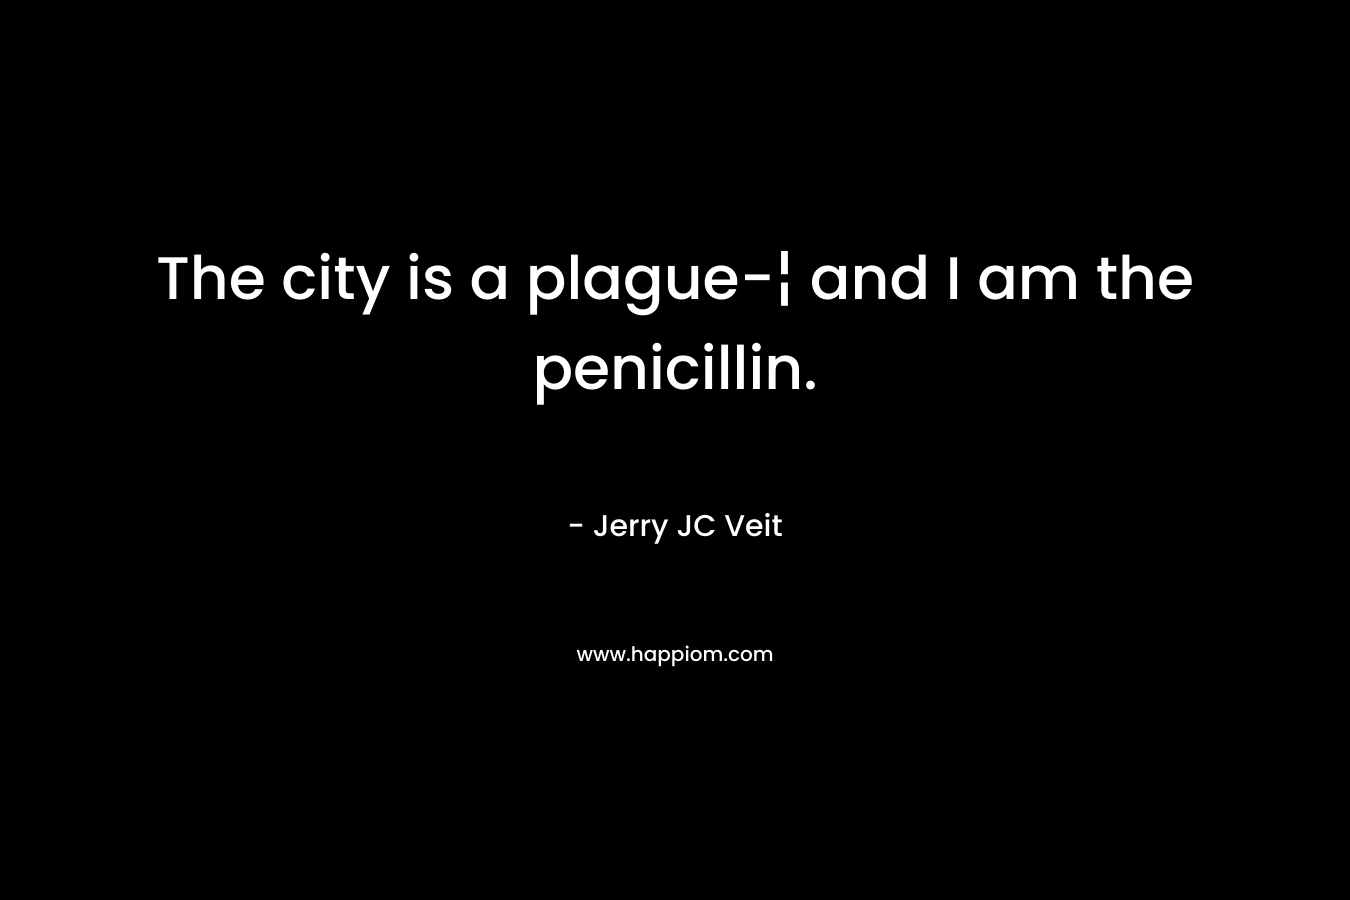 The city is a plague-¦ and I am the penicillin.